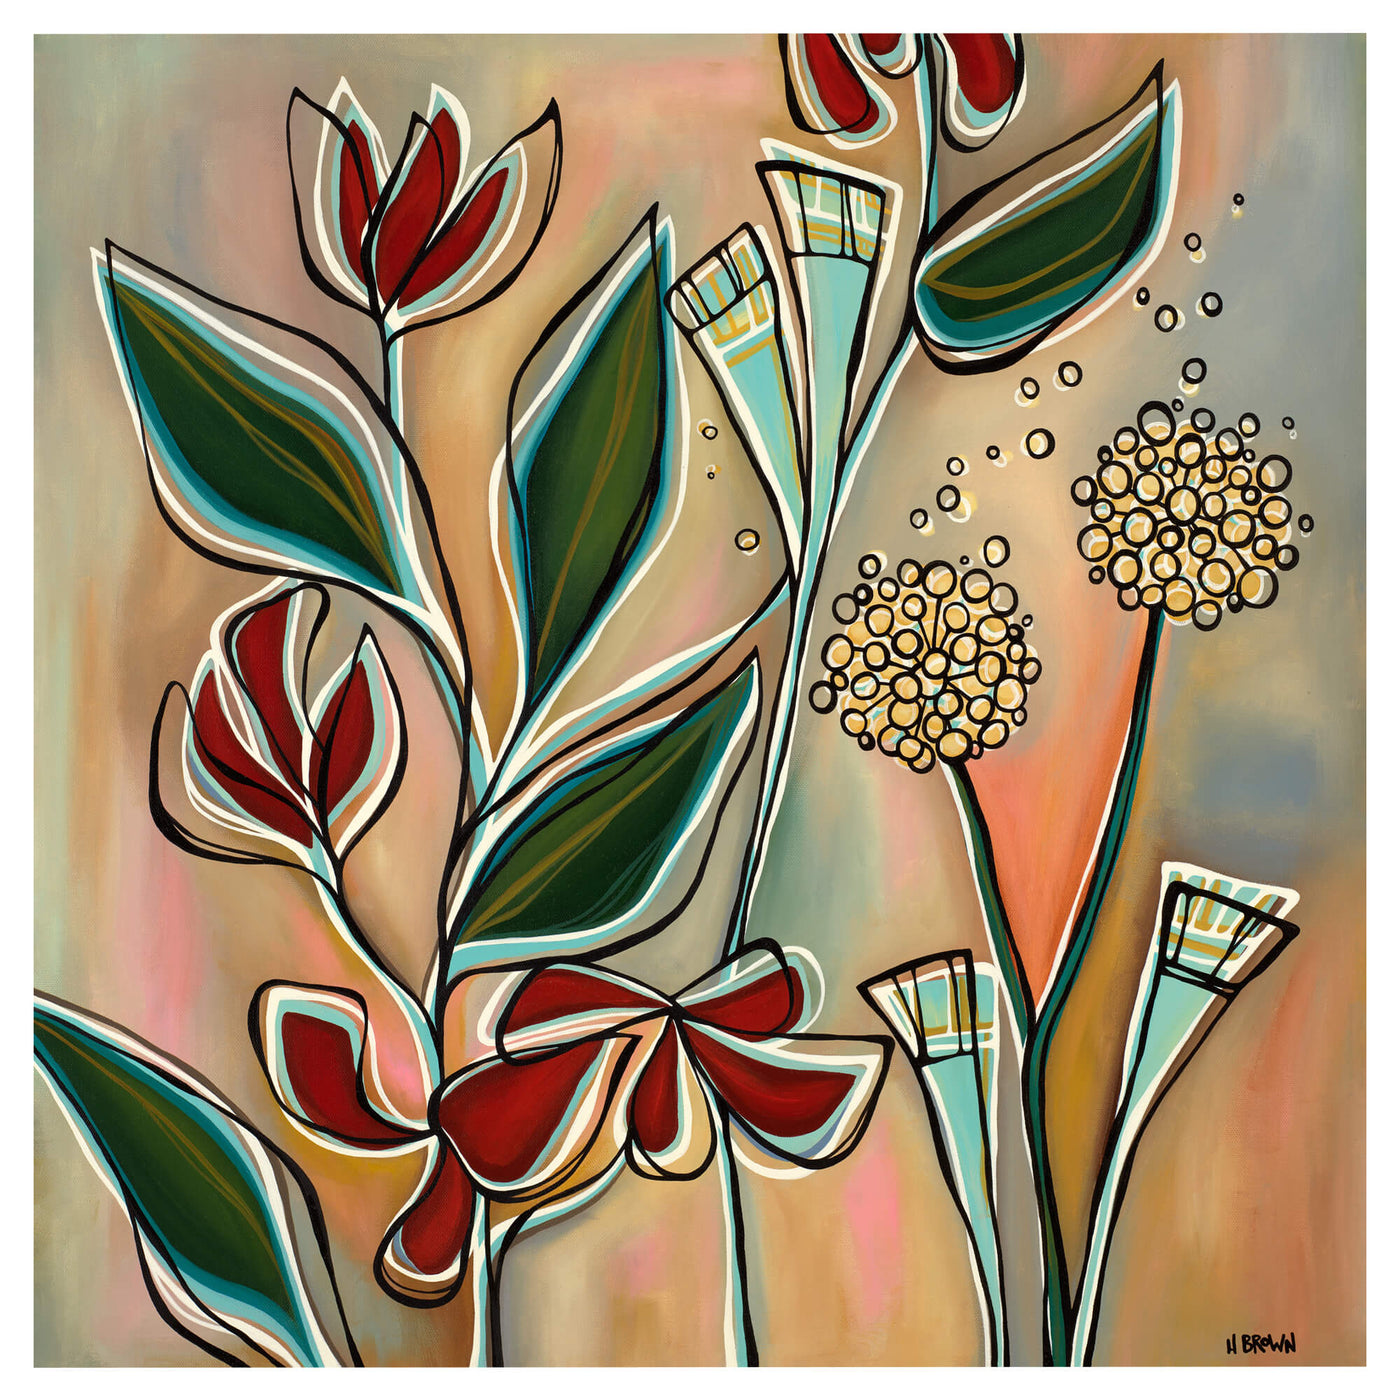 A canvas giclée print of heliconia flowers by Hawaii surf artist Heather Brown